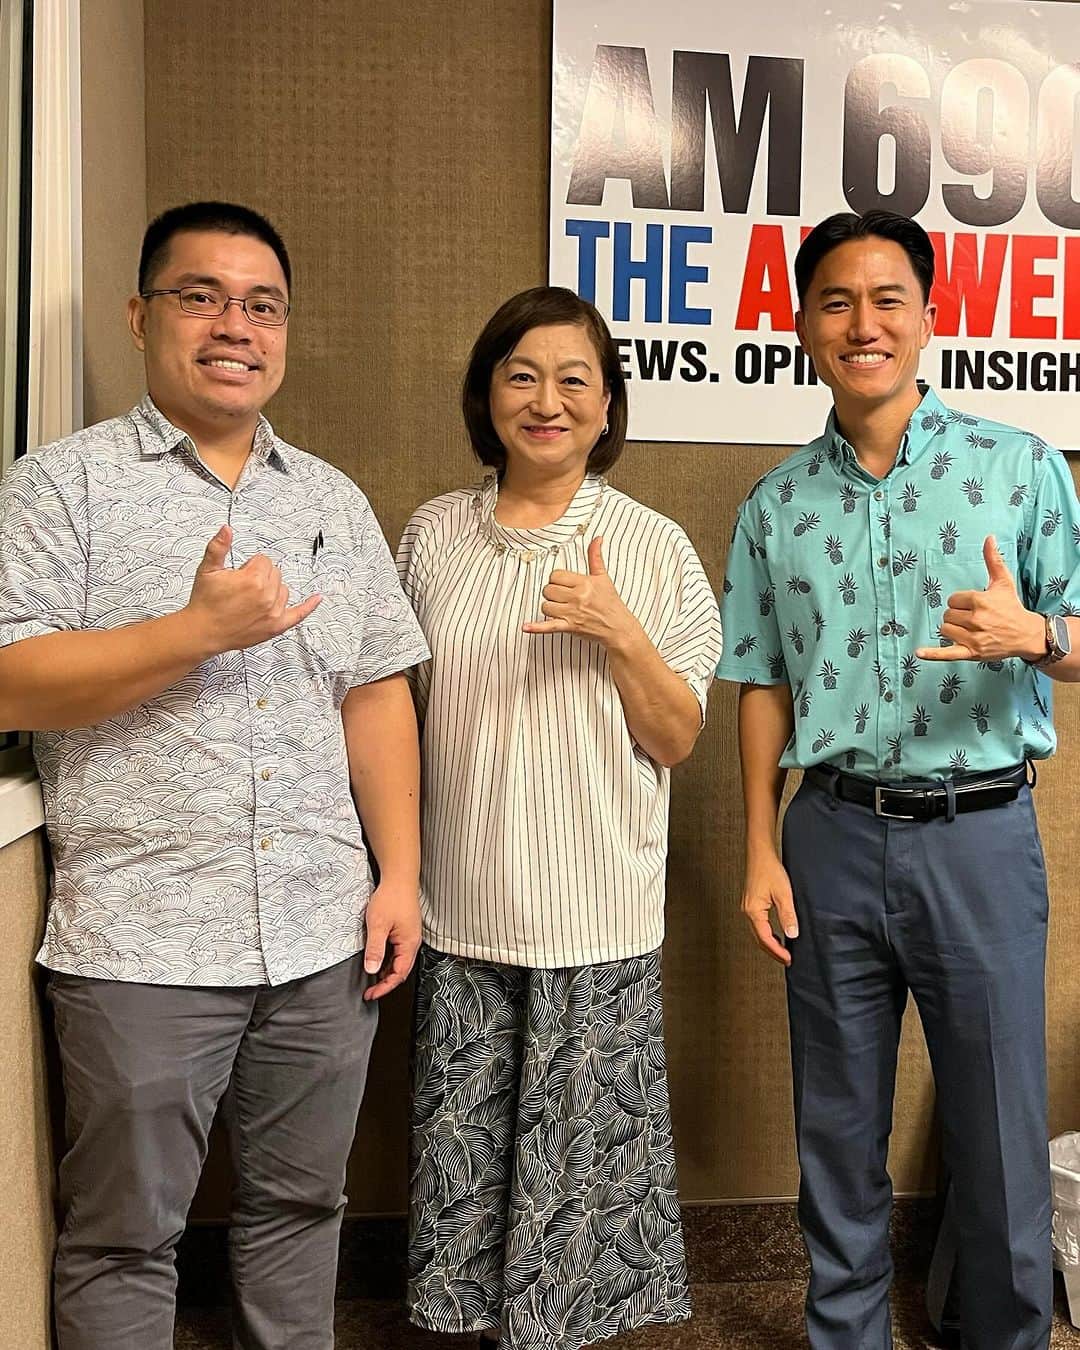 Reiko Lewisのインスタグラム：「Hawaii’s Senior Resource radio program, KupunaWiki Radio Show invited me for their January show to speak to the audience. The show’s hosts, Brandon and Andrew, and I talked about creating necessary conditions for a well-being residence for the Kupuna, or seniors and we also talked about a new service Ventus Design is planning to launch early next year.  Look forward to the program in January and stay tuned!   ハワイのシニア・リソース・ラジオ番組、クプナウィキ・ラジオ・ショーが1月向けの番組に私を招待してくださいました。番組の司会者であるブランドンとアンドリューとと一緒に、クプナ（高齢者）のためのウェルビーイング・レジデンスに必要な条件づくりは何なのかついて話し、またヴェンタス・デザインが来年早々に開始する予定になっている新しいサービスについても話しさせていただきました。  来月の番組放送をお楽しみに！」